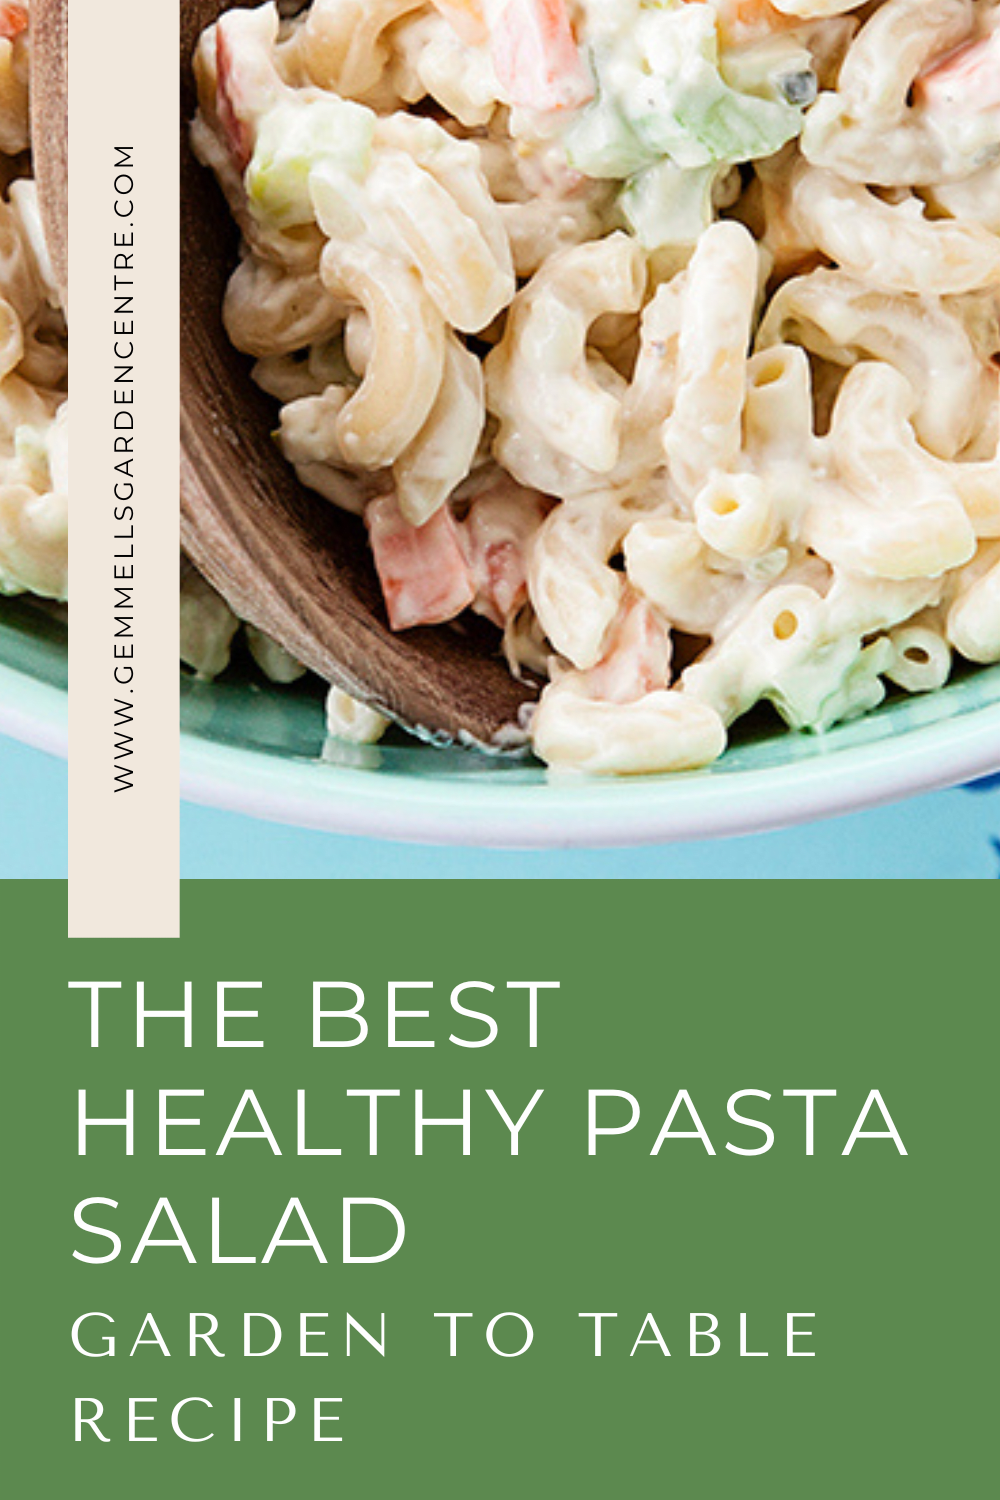 The Best Healthy Pasta Salad Recipe Garden to Table